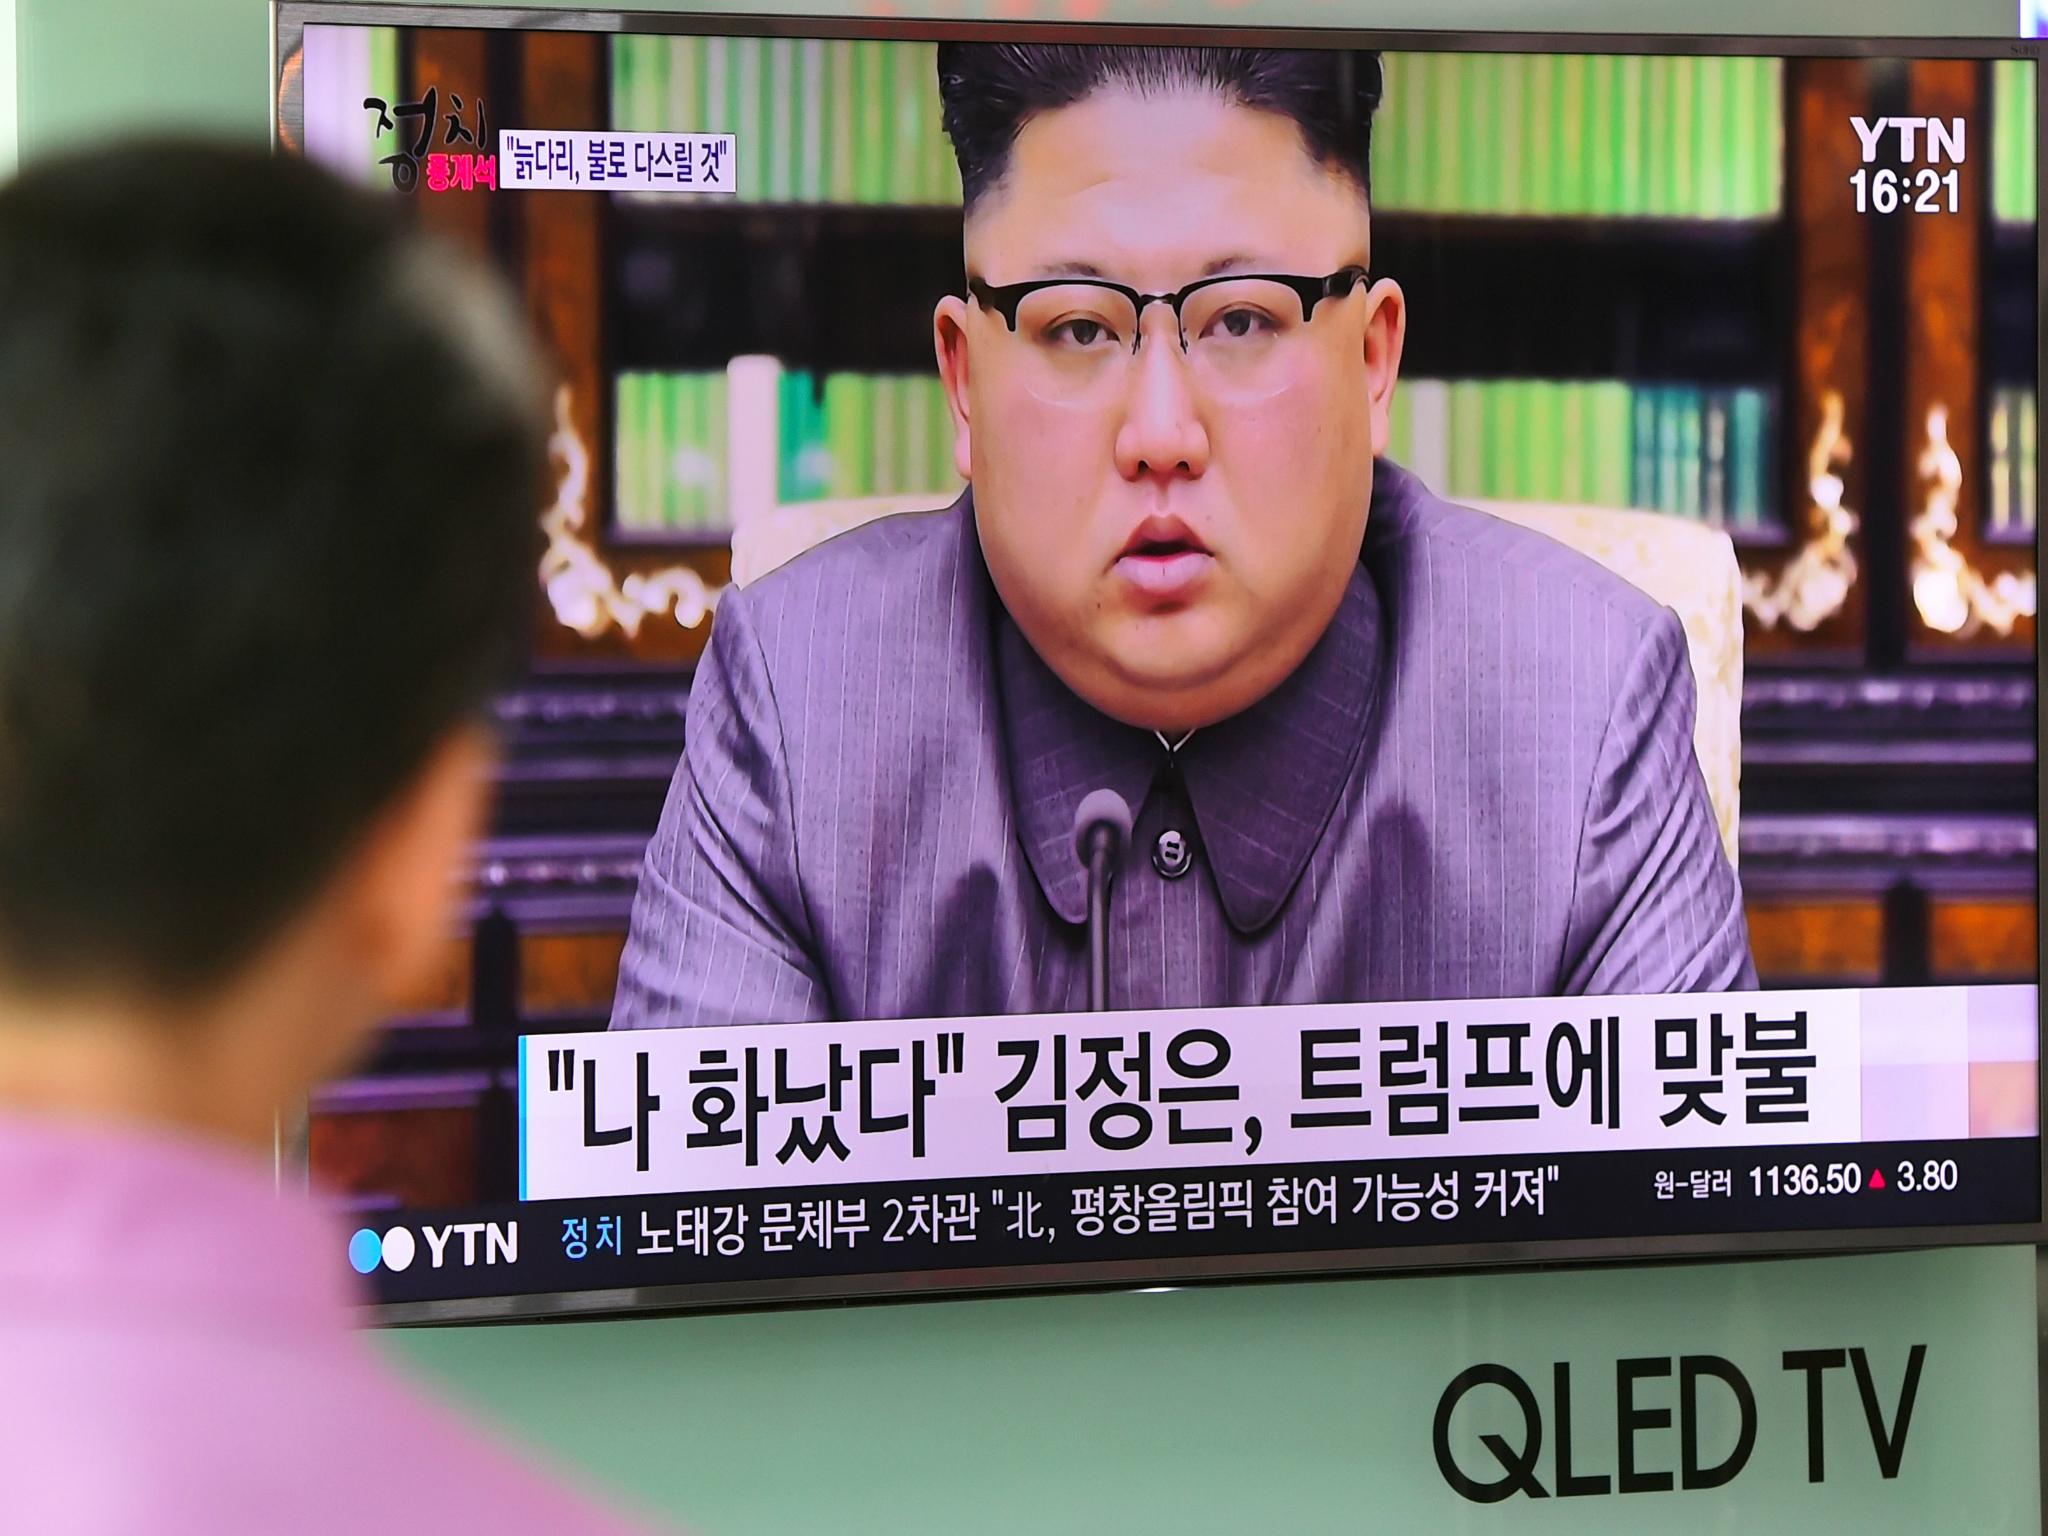 A man watches a television news screen showing a picture of North Korean leader Kim Jong-Un delivering a statement in Pyongyang, at a railway station in Seoul on 22 September 2017.